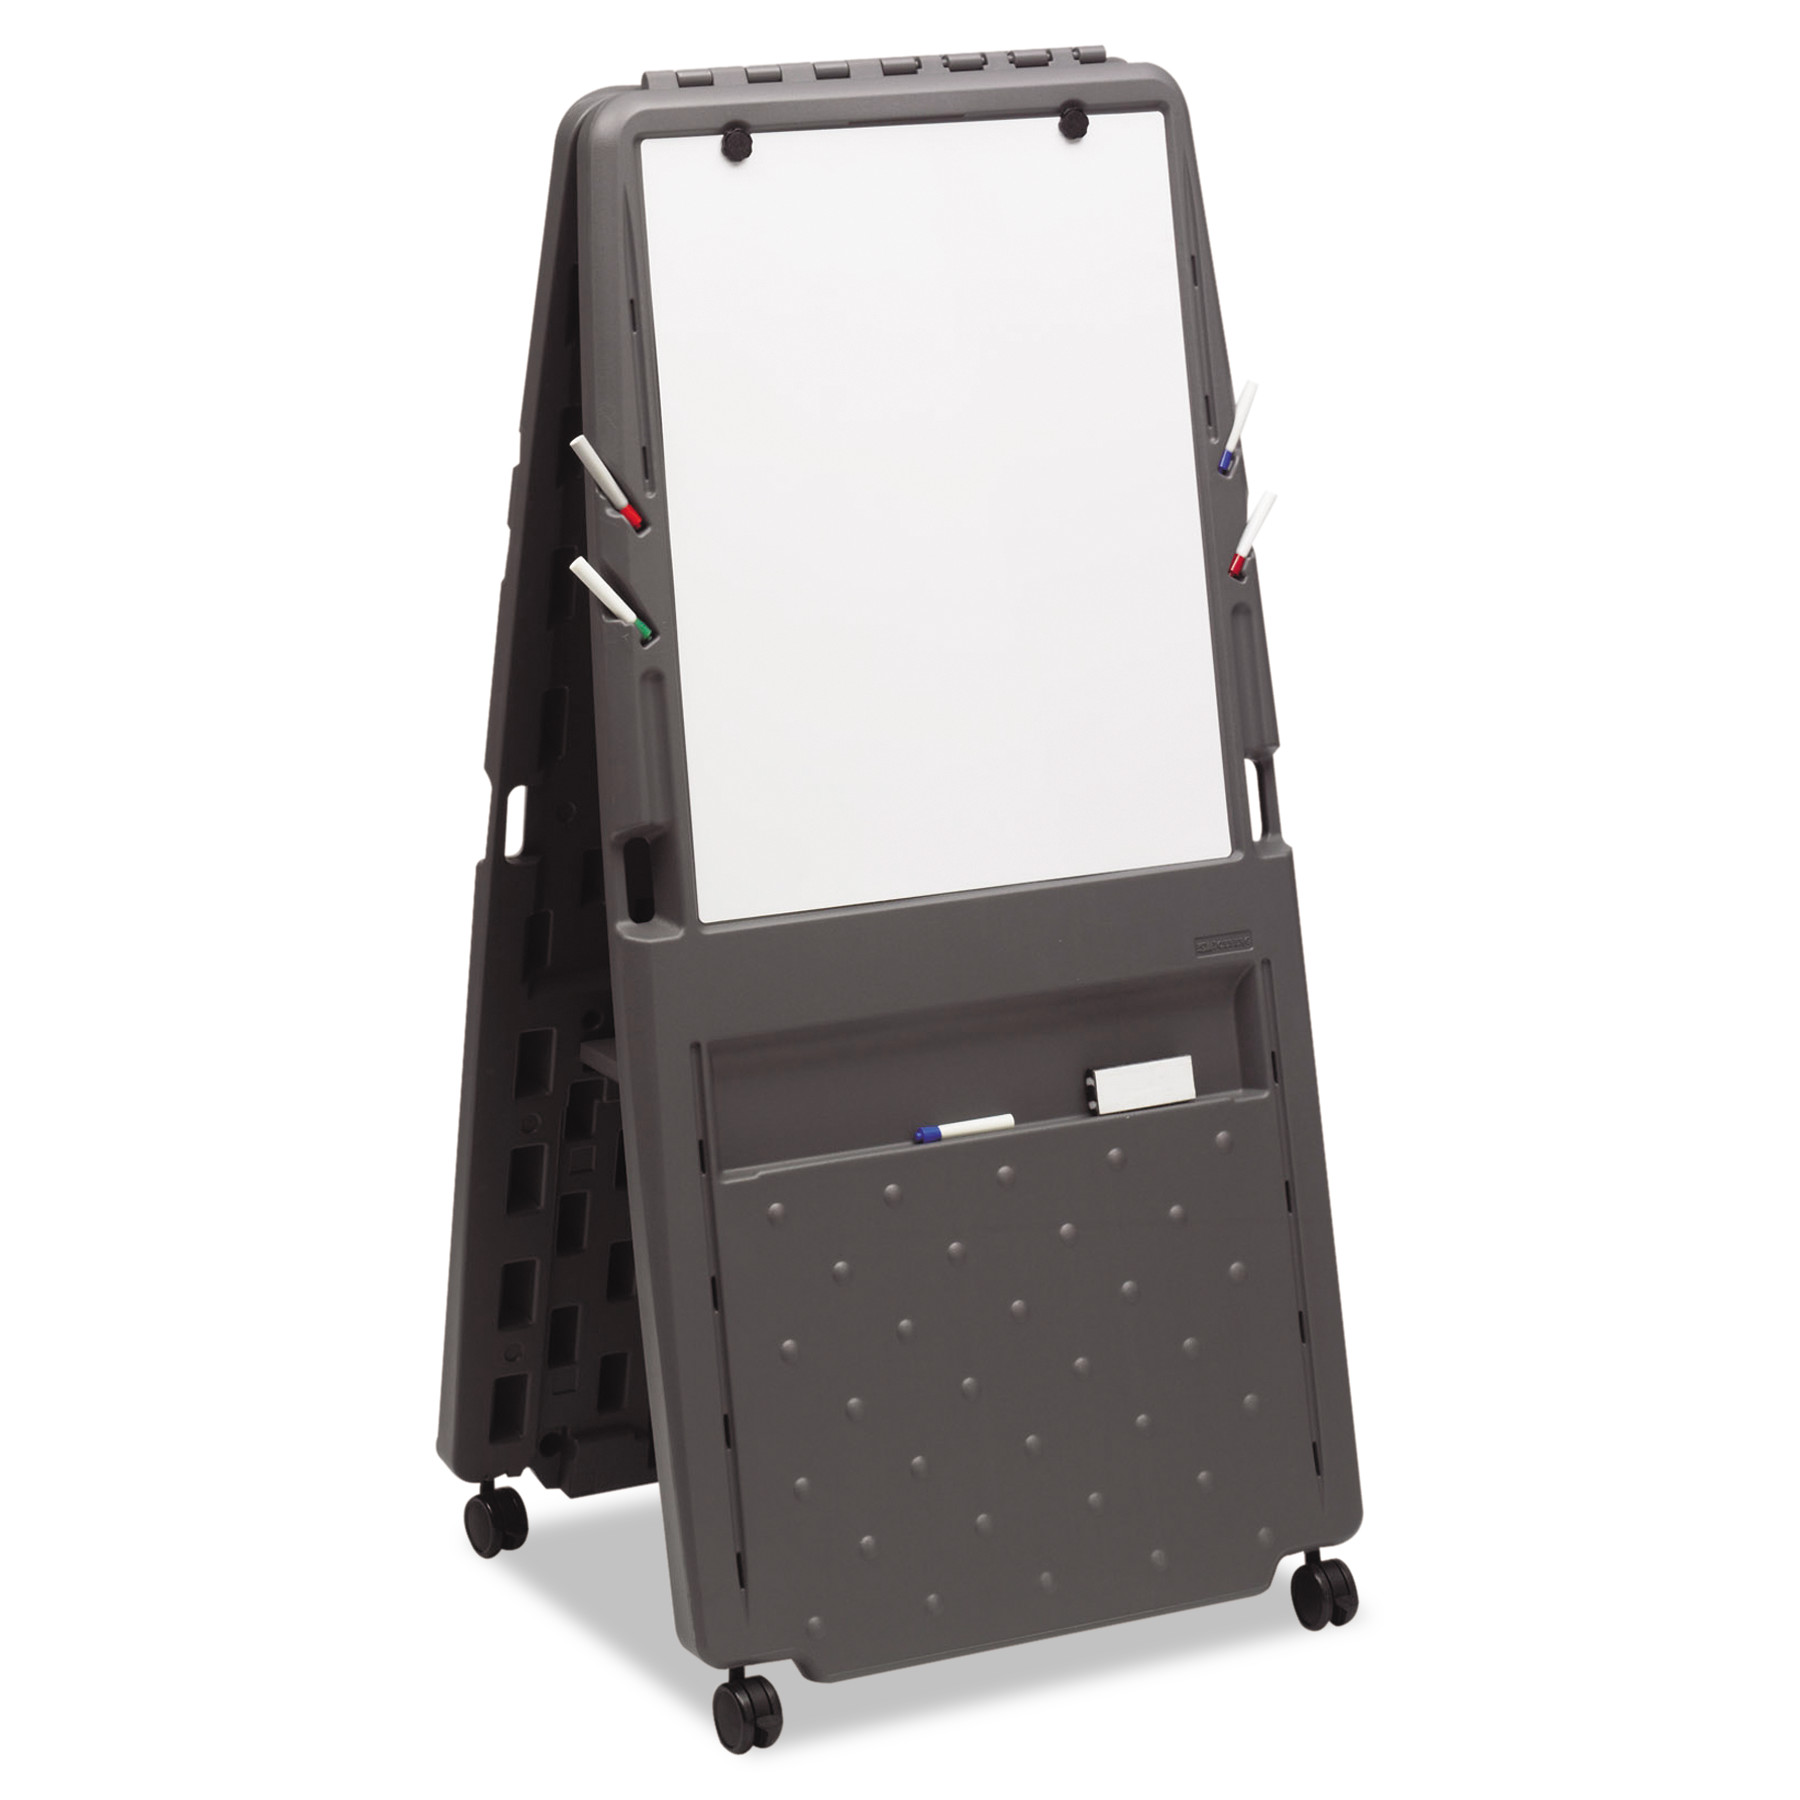 Presentation Flipchart Easel With Dry Erase Surface, Resin, 33x28x73, Charcoal